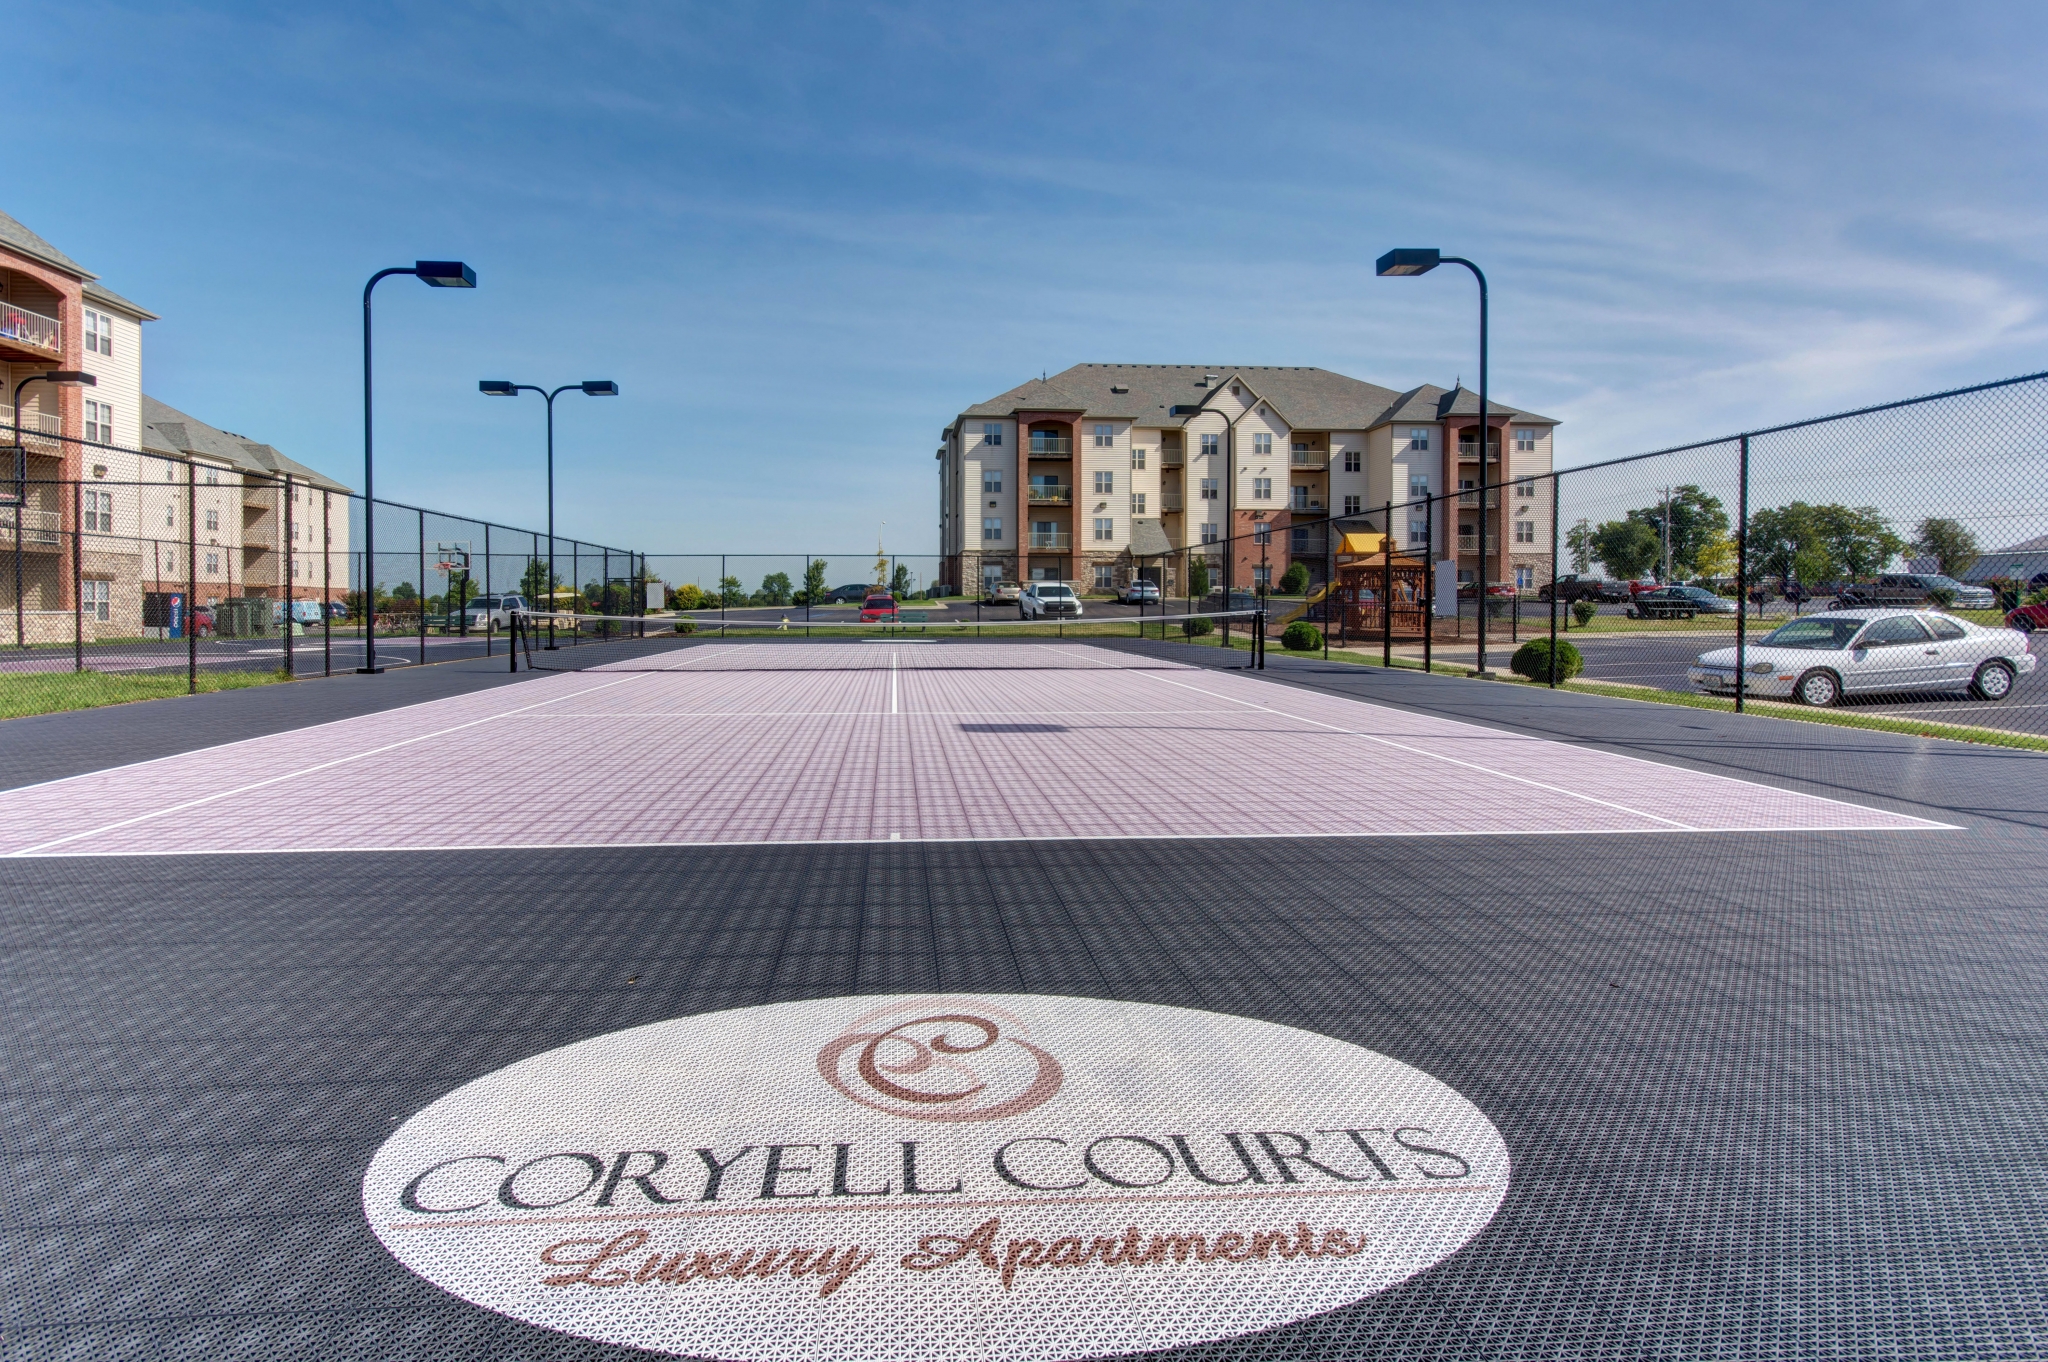 Coryell Courts Apartments amenity tennis court overlooking the exterior apartment building